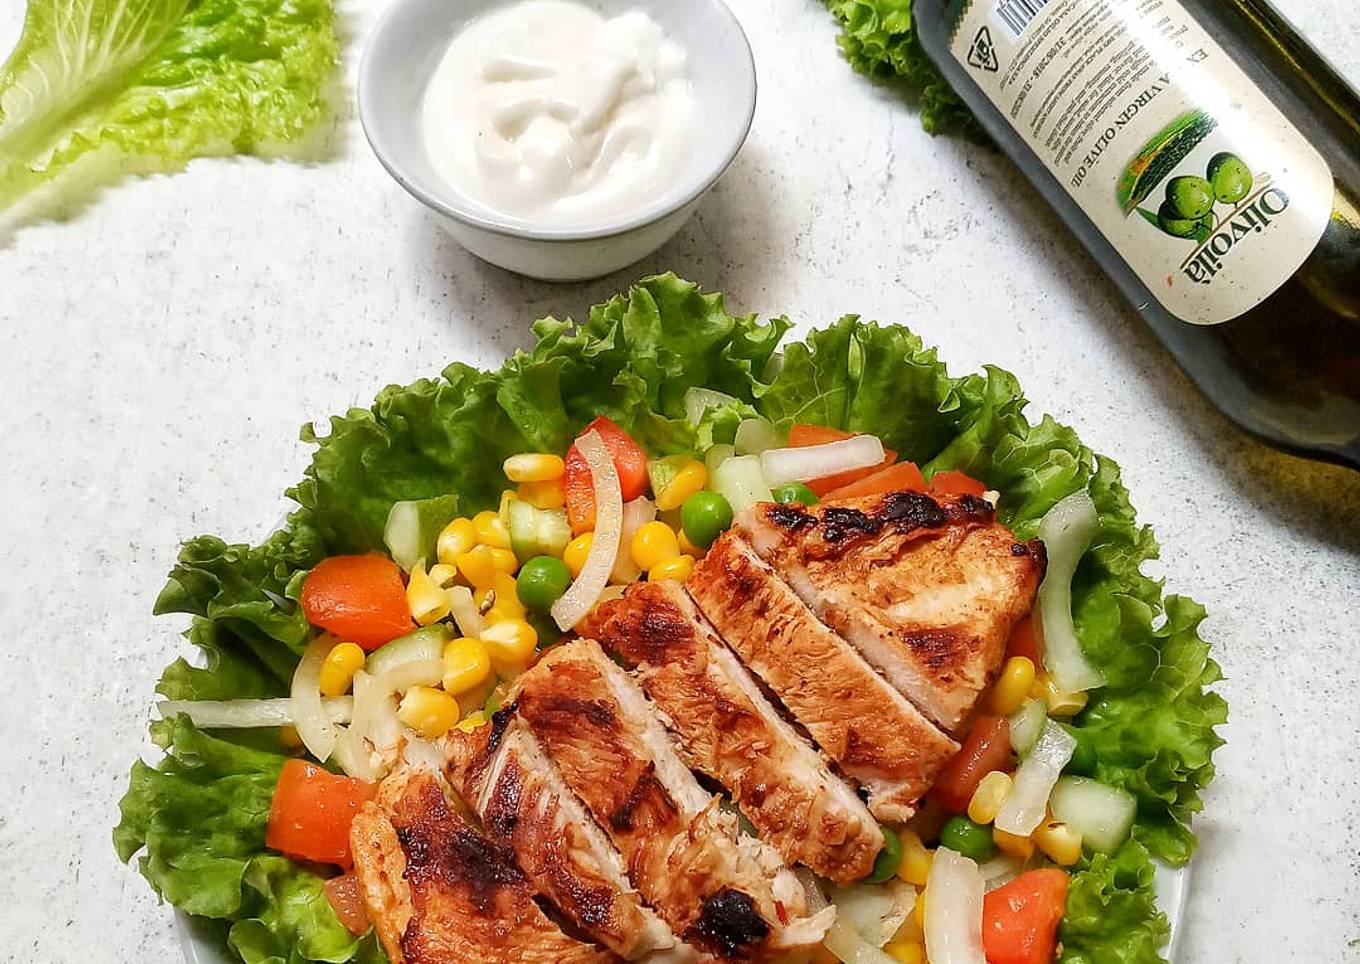 Grill chicken salad with olivoila dressing